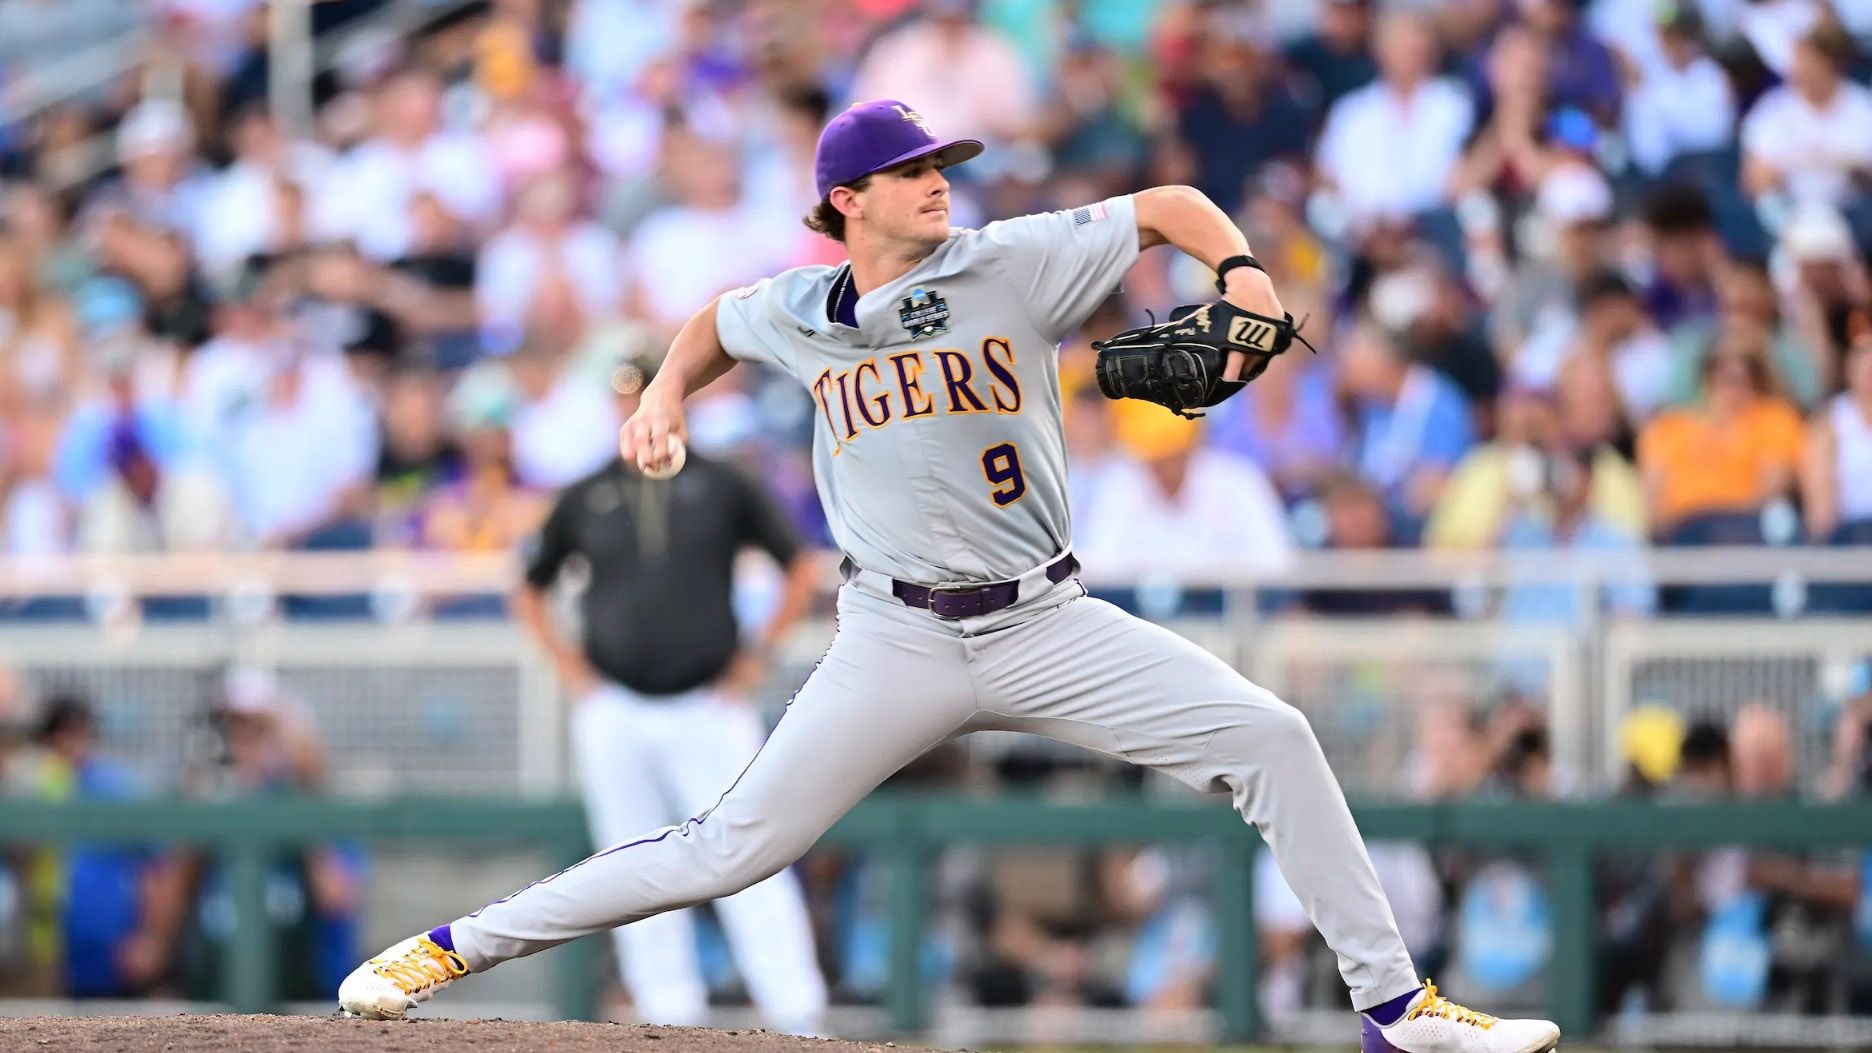 LSU drops MCWS contest to No. 1 Wake Forest